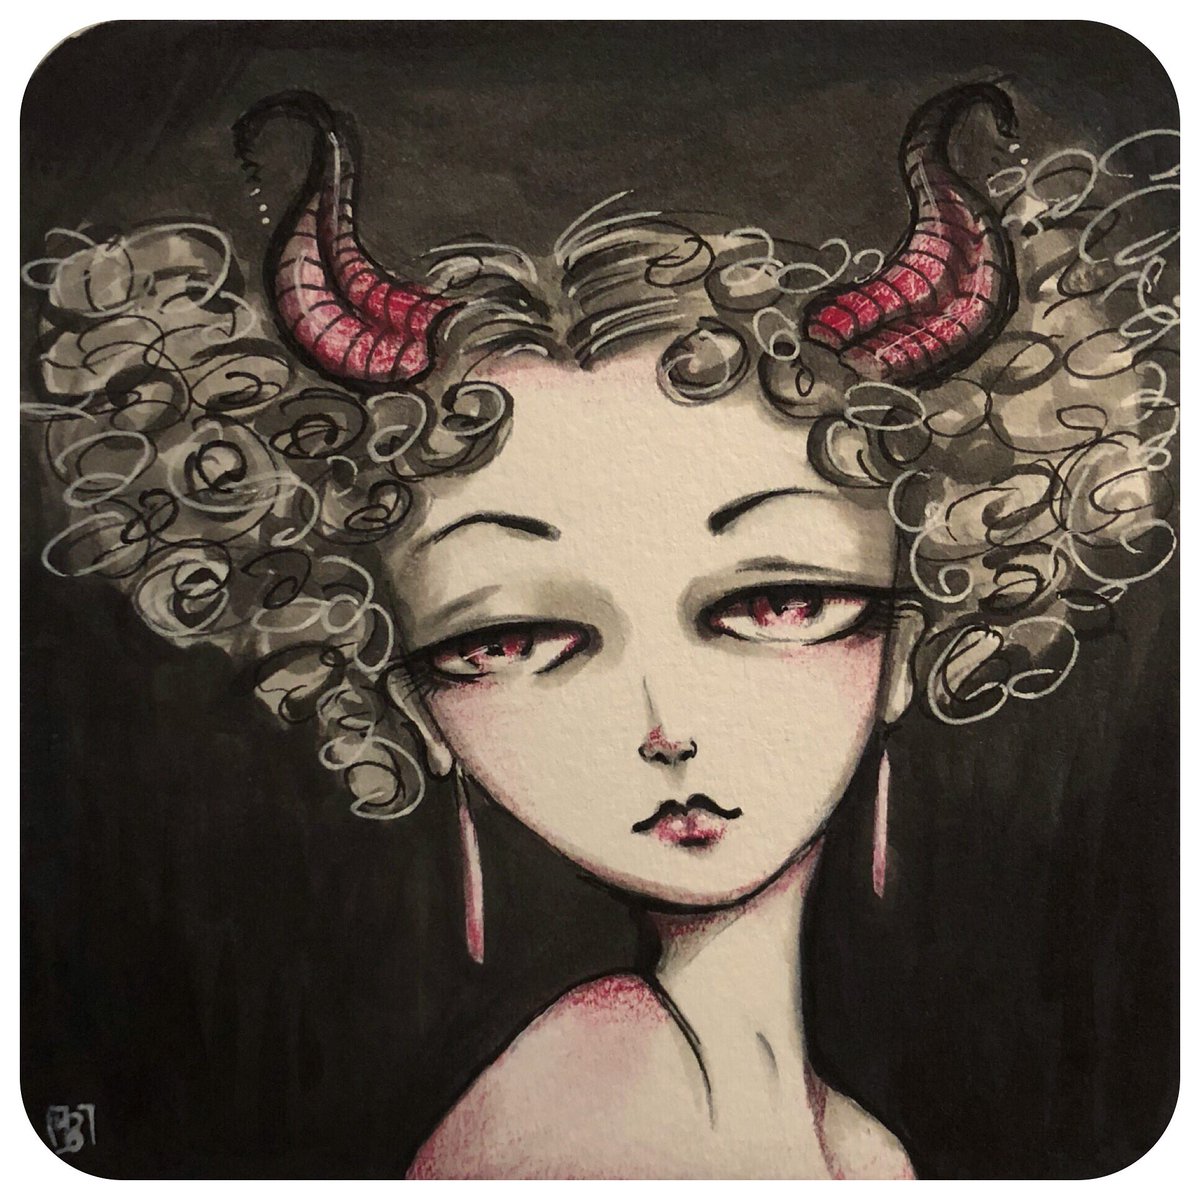 “devils among us” 4”x4” for upcoming #coastershow at @gallery30south show opens Oct 4th